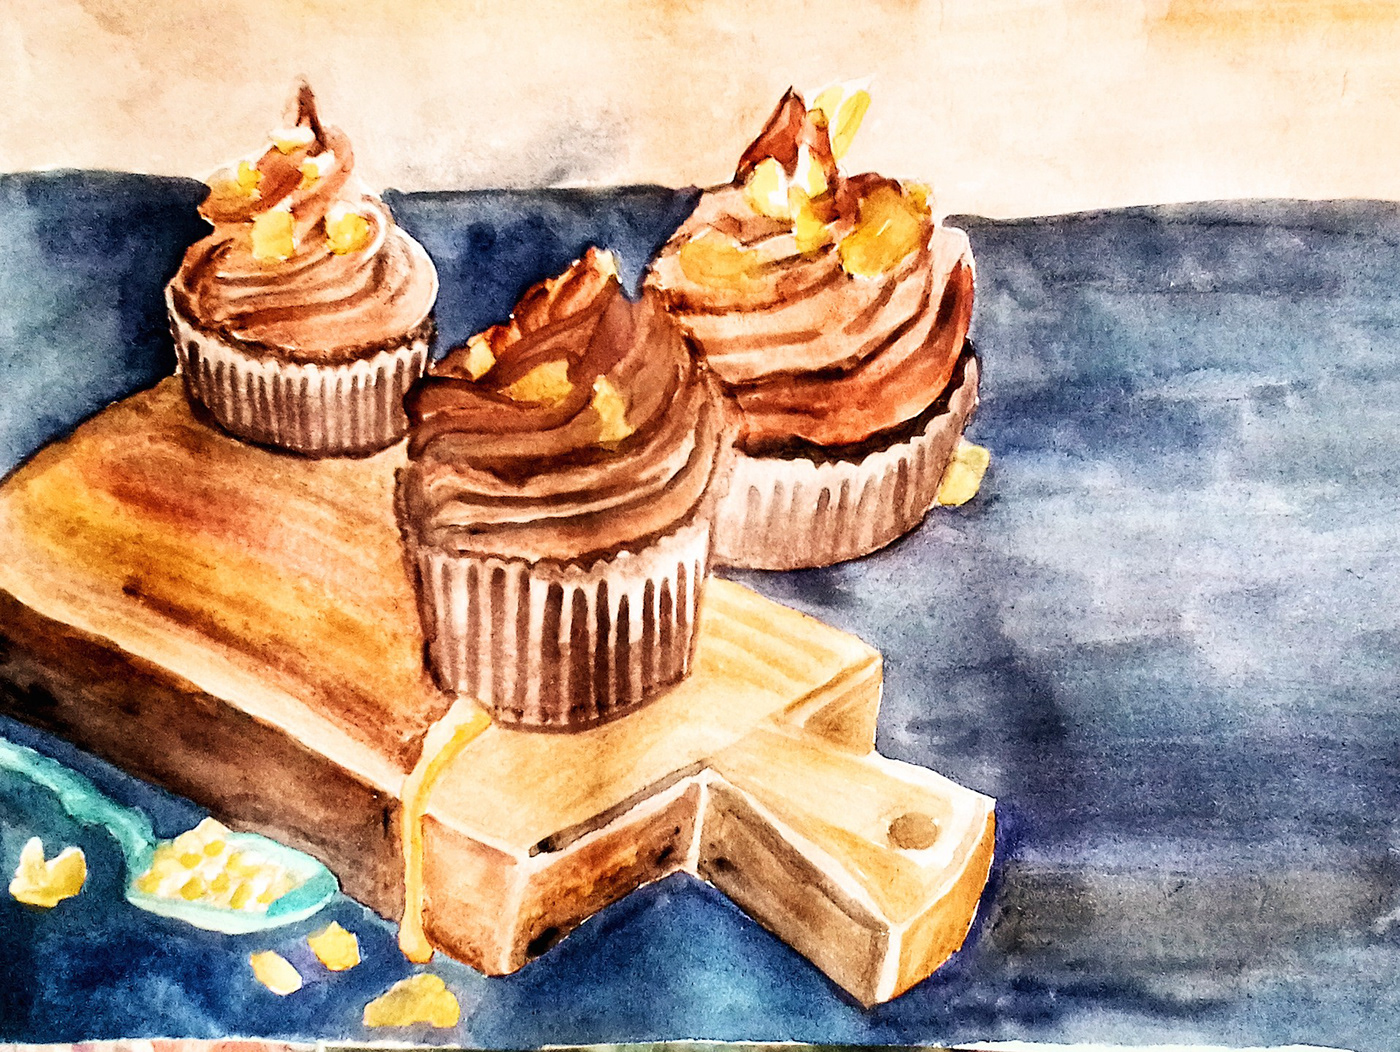 painting   Drawing  ILLUSTRATION  artwork Food  food illustration watercolor sketch graphic Stylization